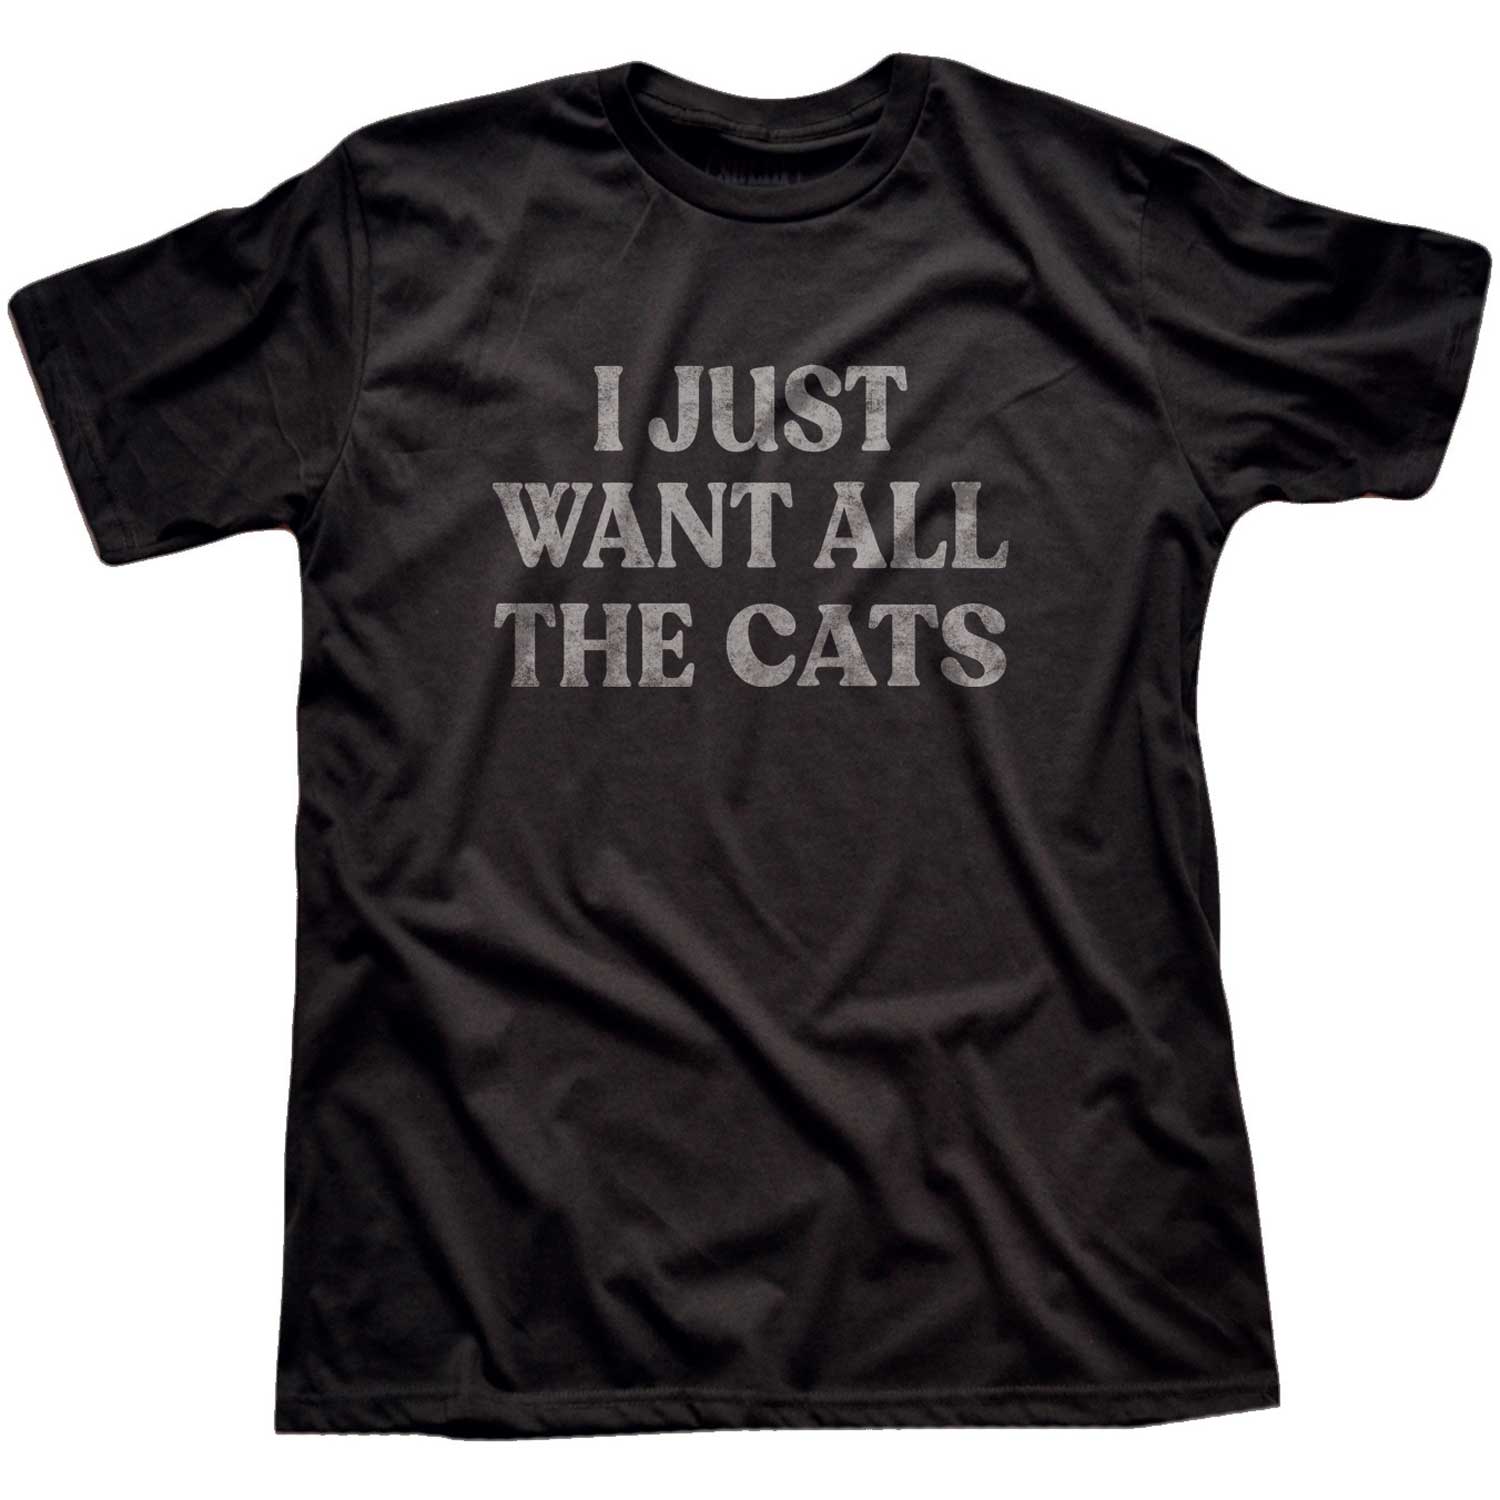 Men's I Just Want All The Cats Vintage Graphic Tee | Funny Animal Soft T-shirt | Solid Threads